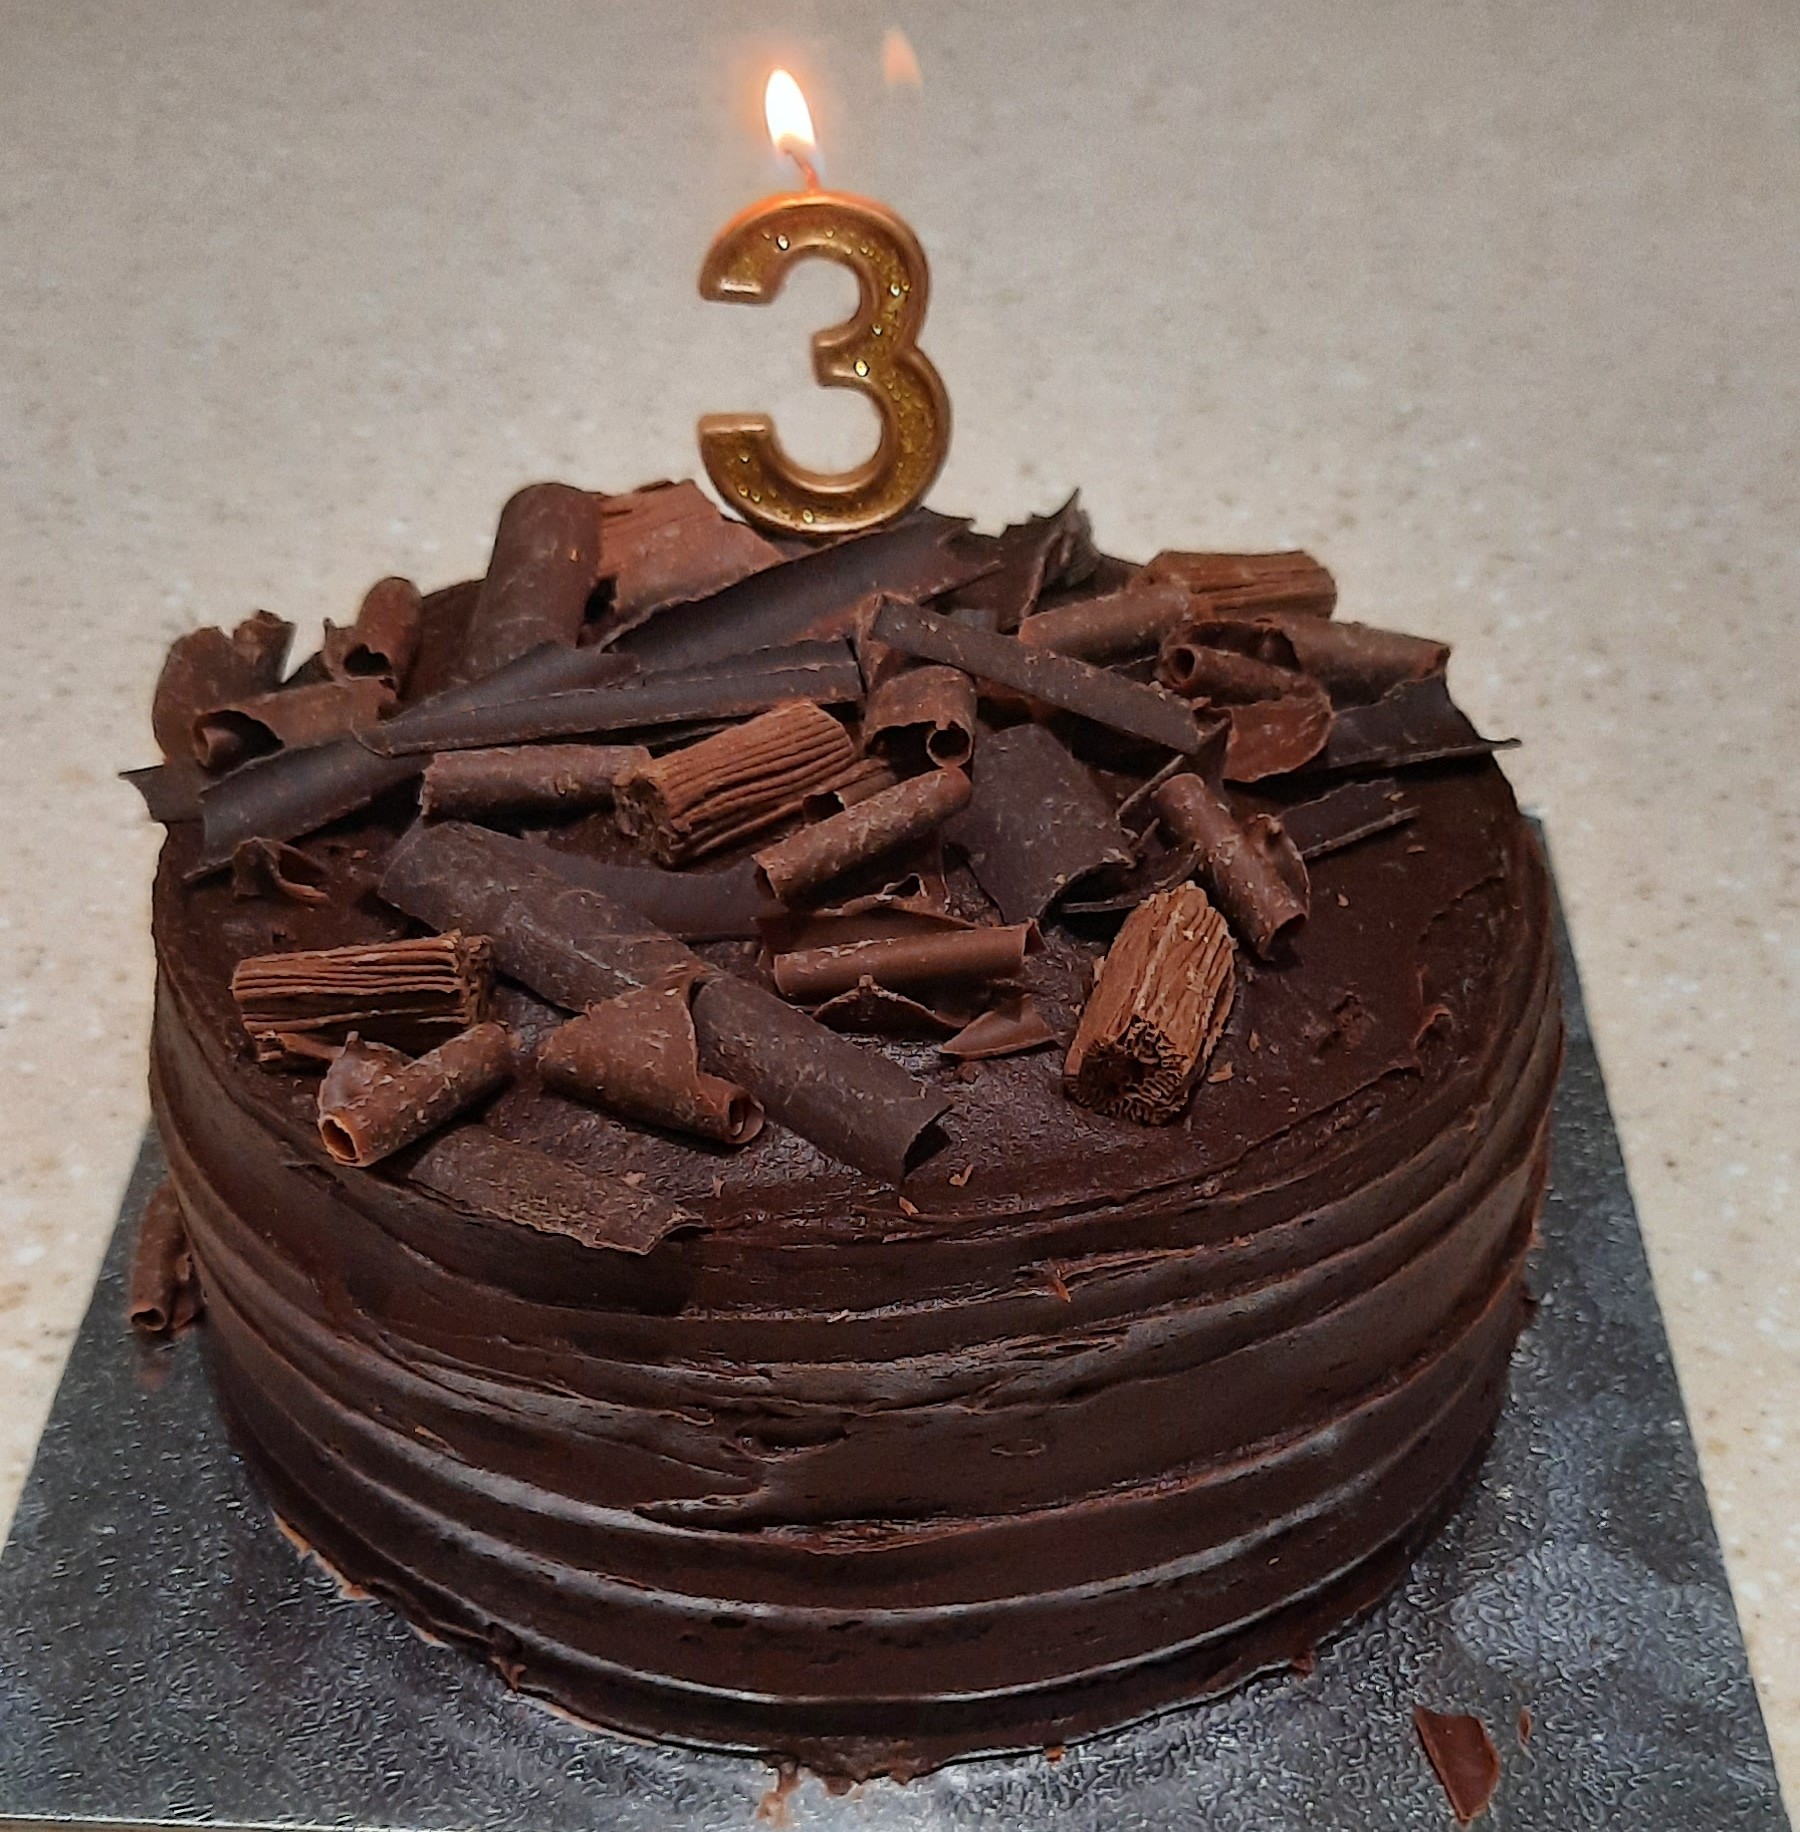 A round chocolate cake with a three shaped candle burning.